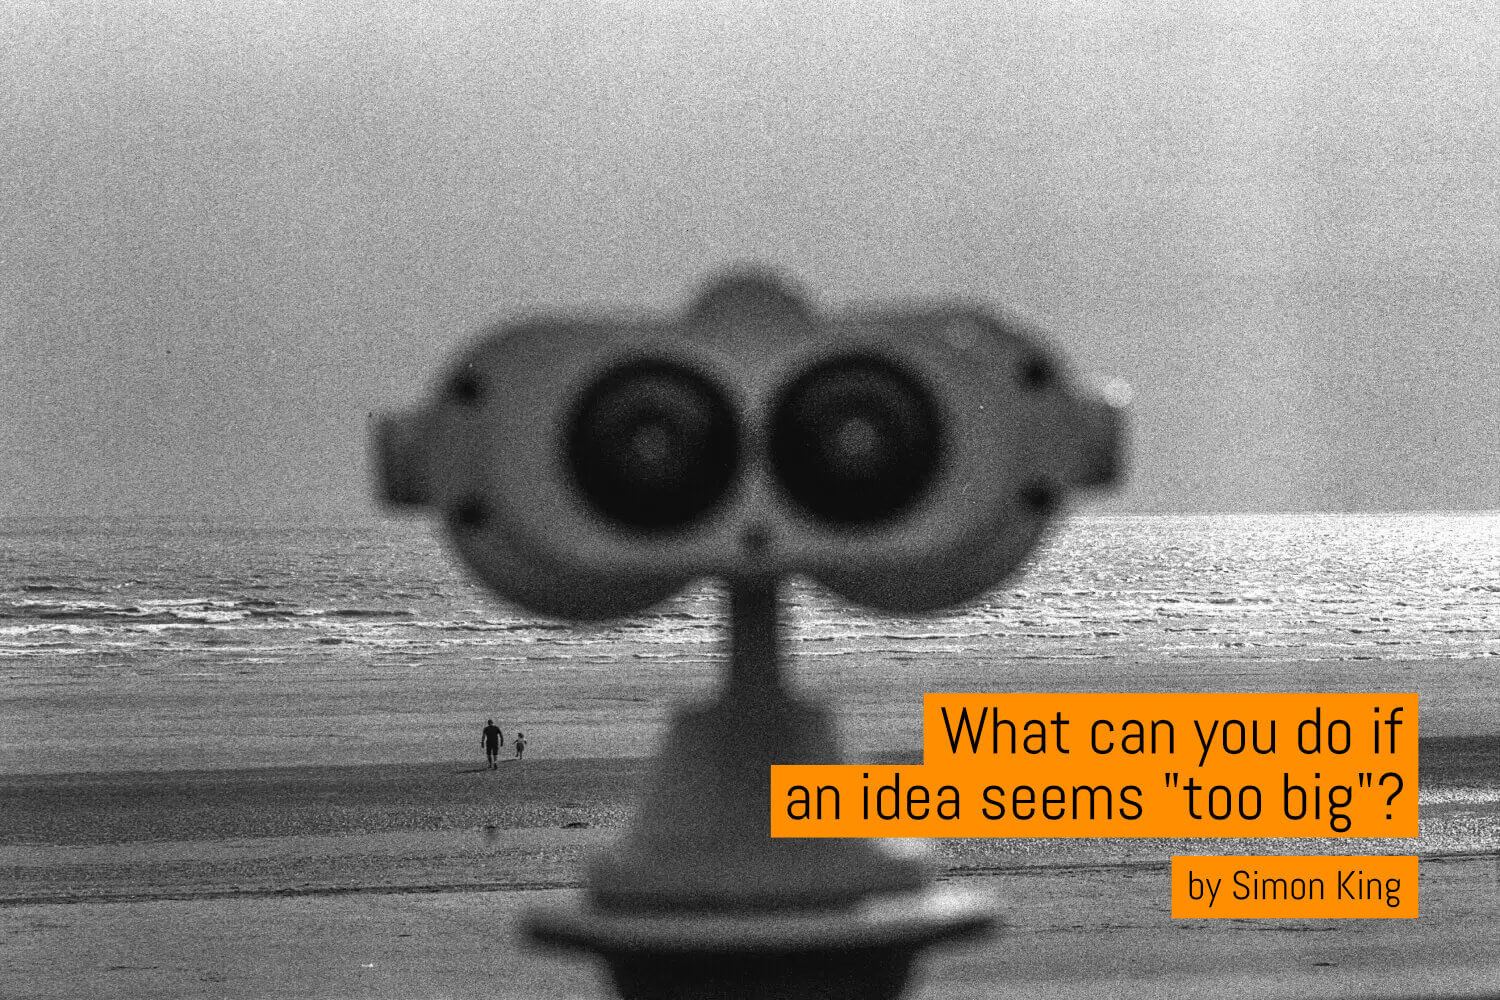 What can you do if an idea seems “too big”?